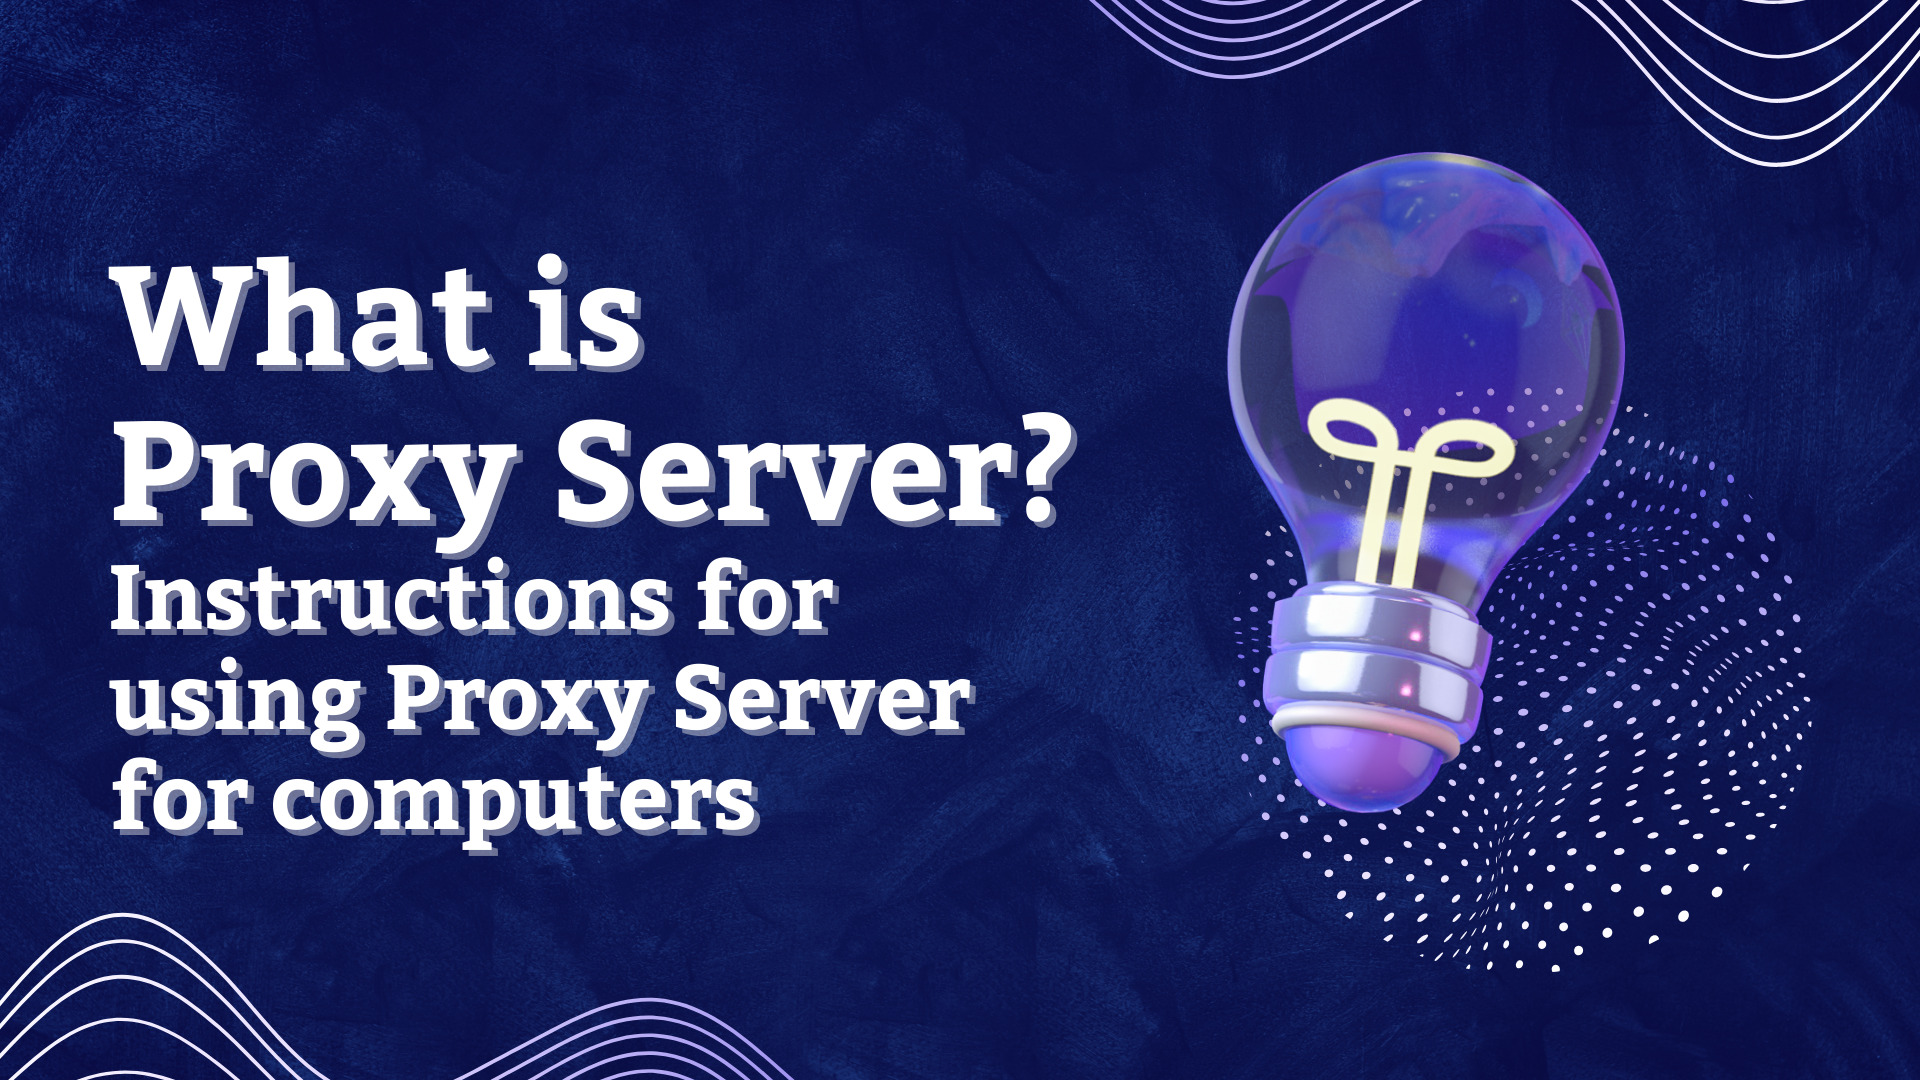 What is Proxy Server? Instructions for using Proxy Servers for computers